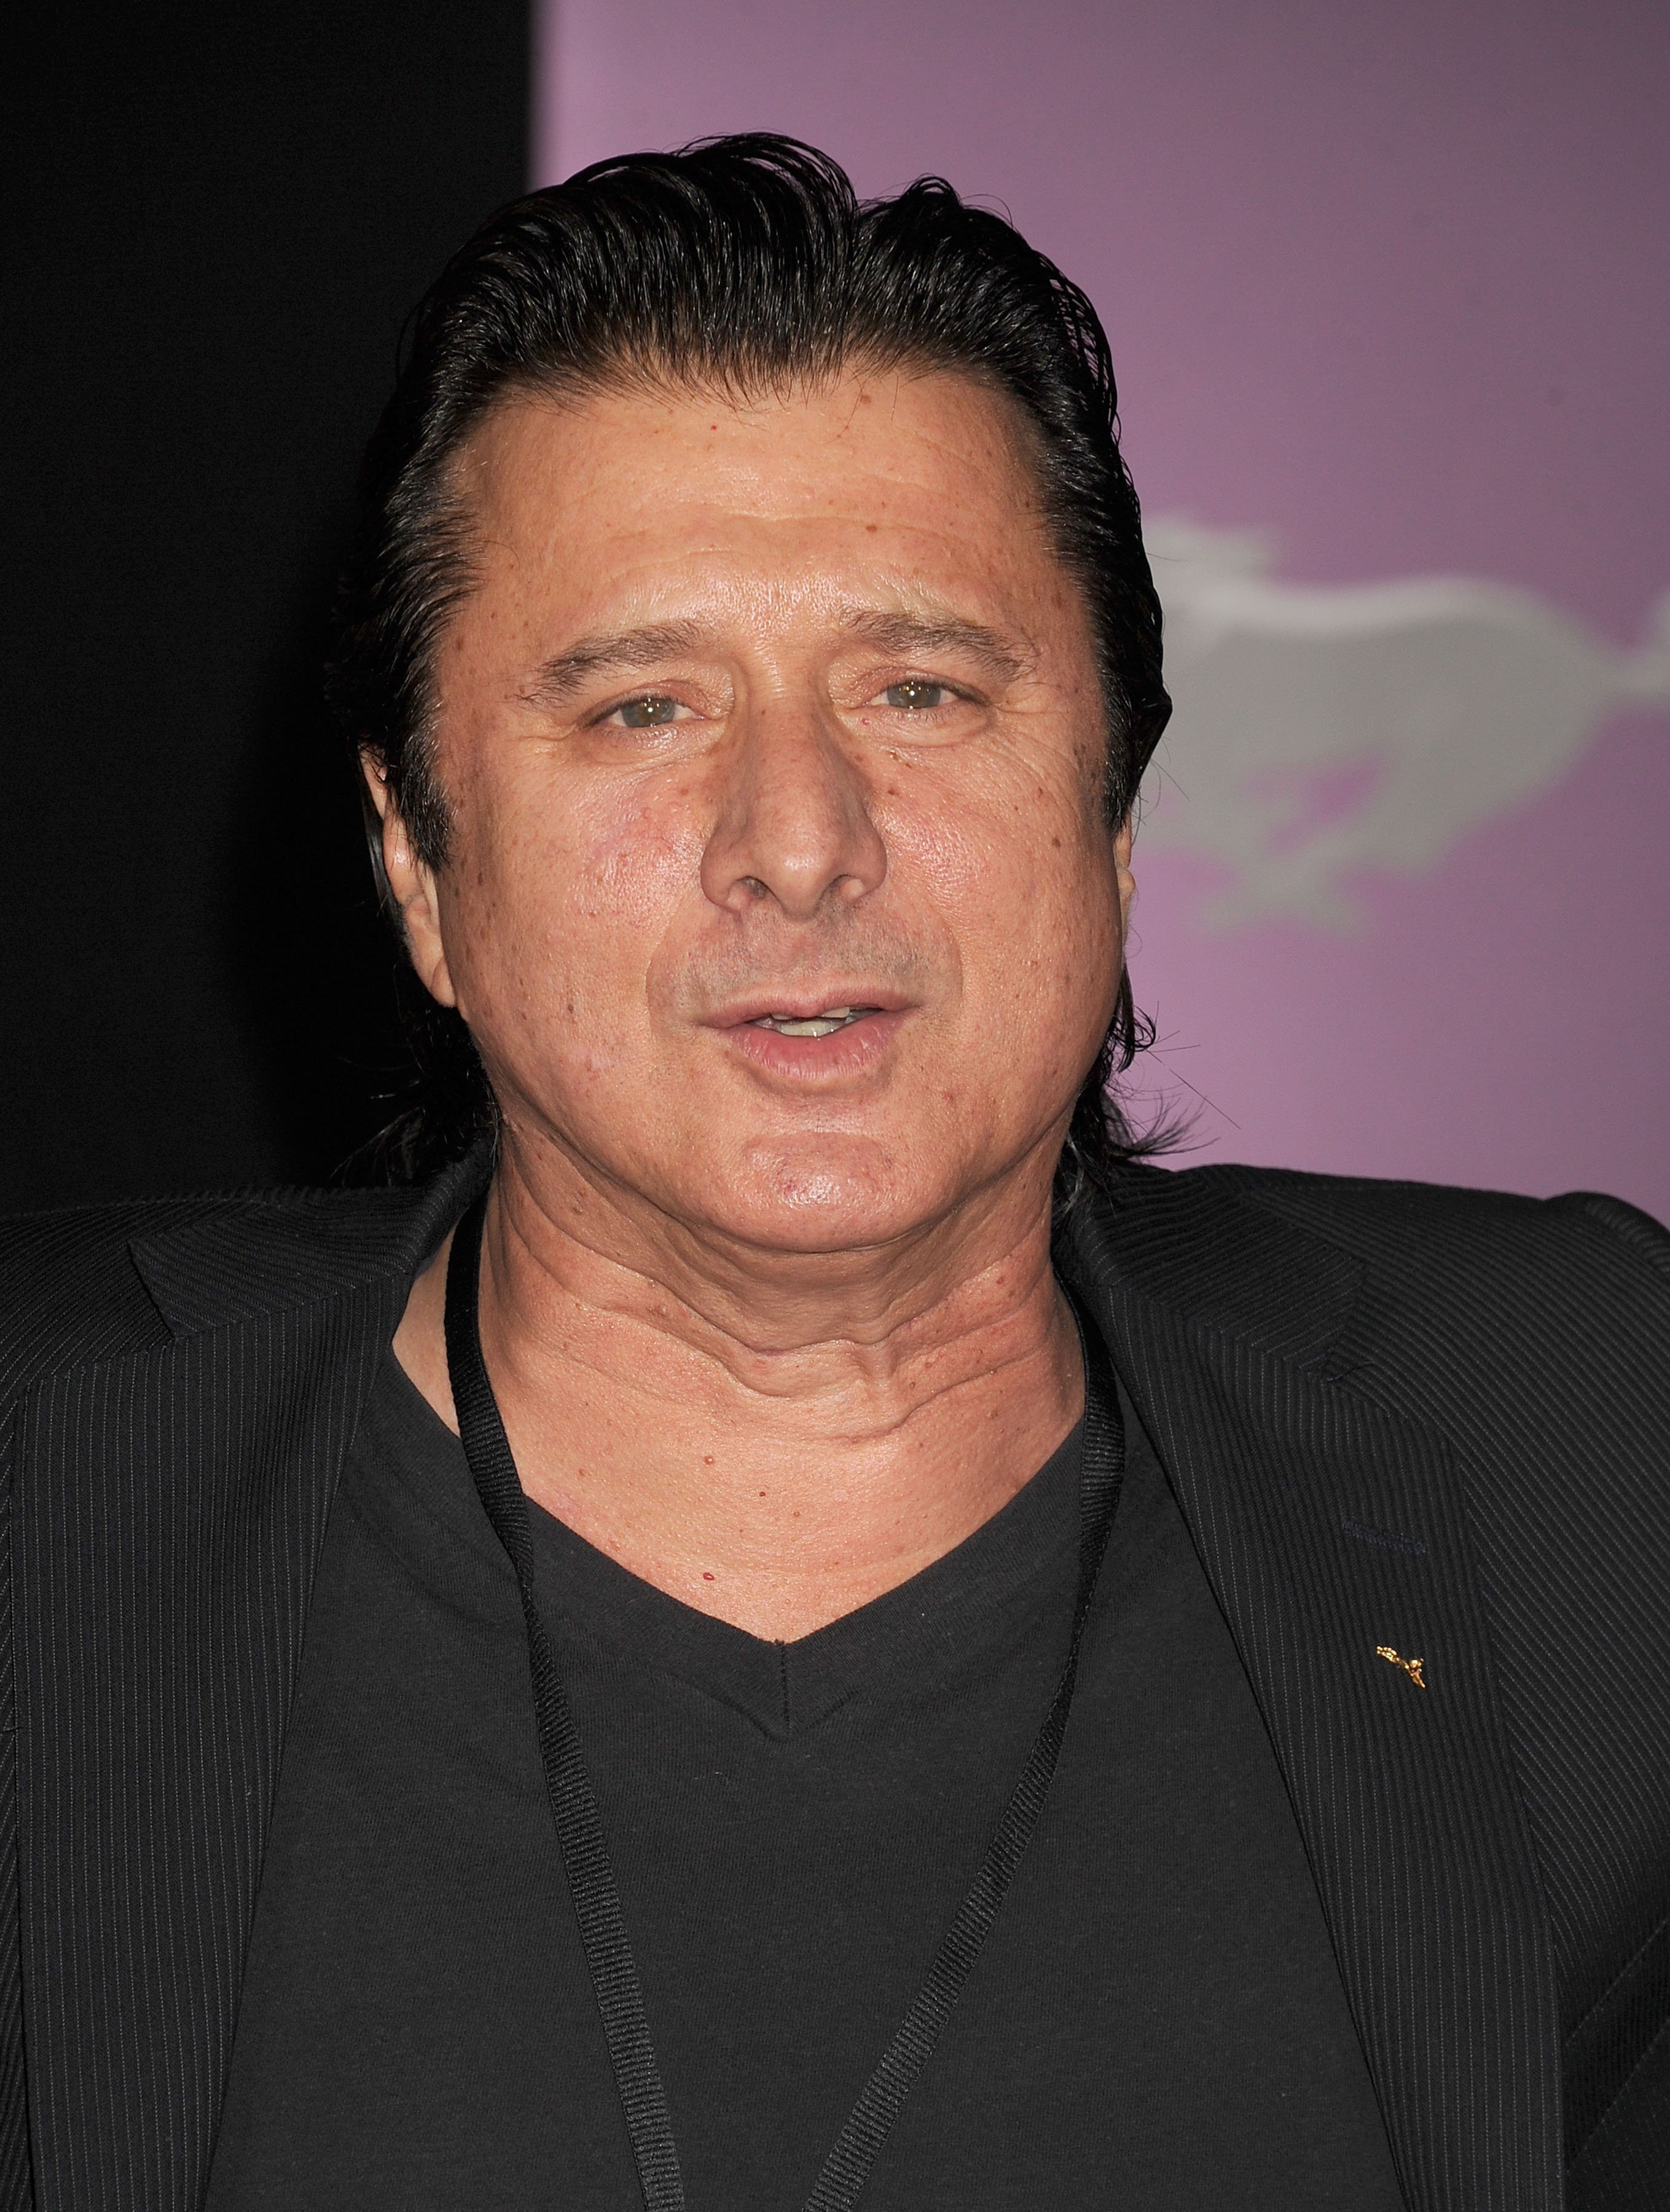 Steve Perry, 2014 | Quelle: Getty Images